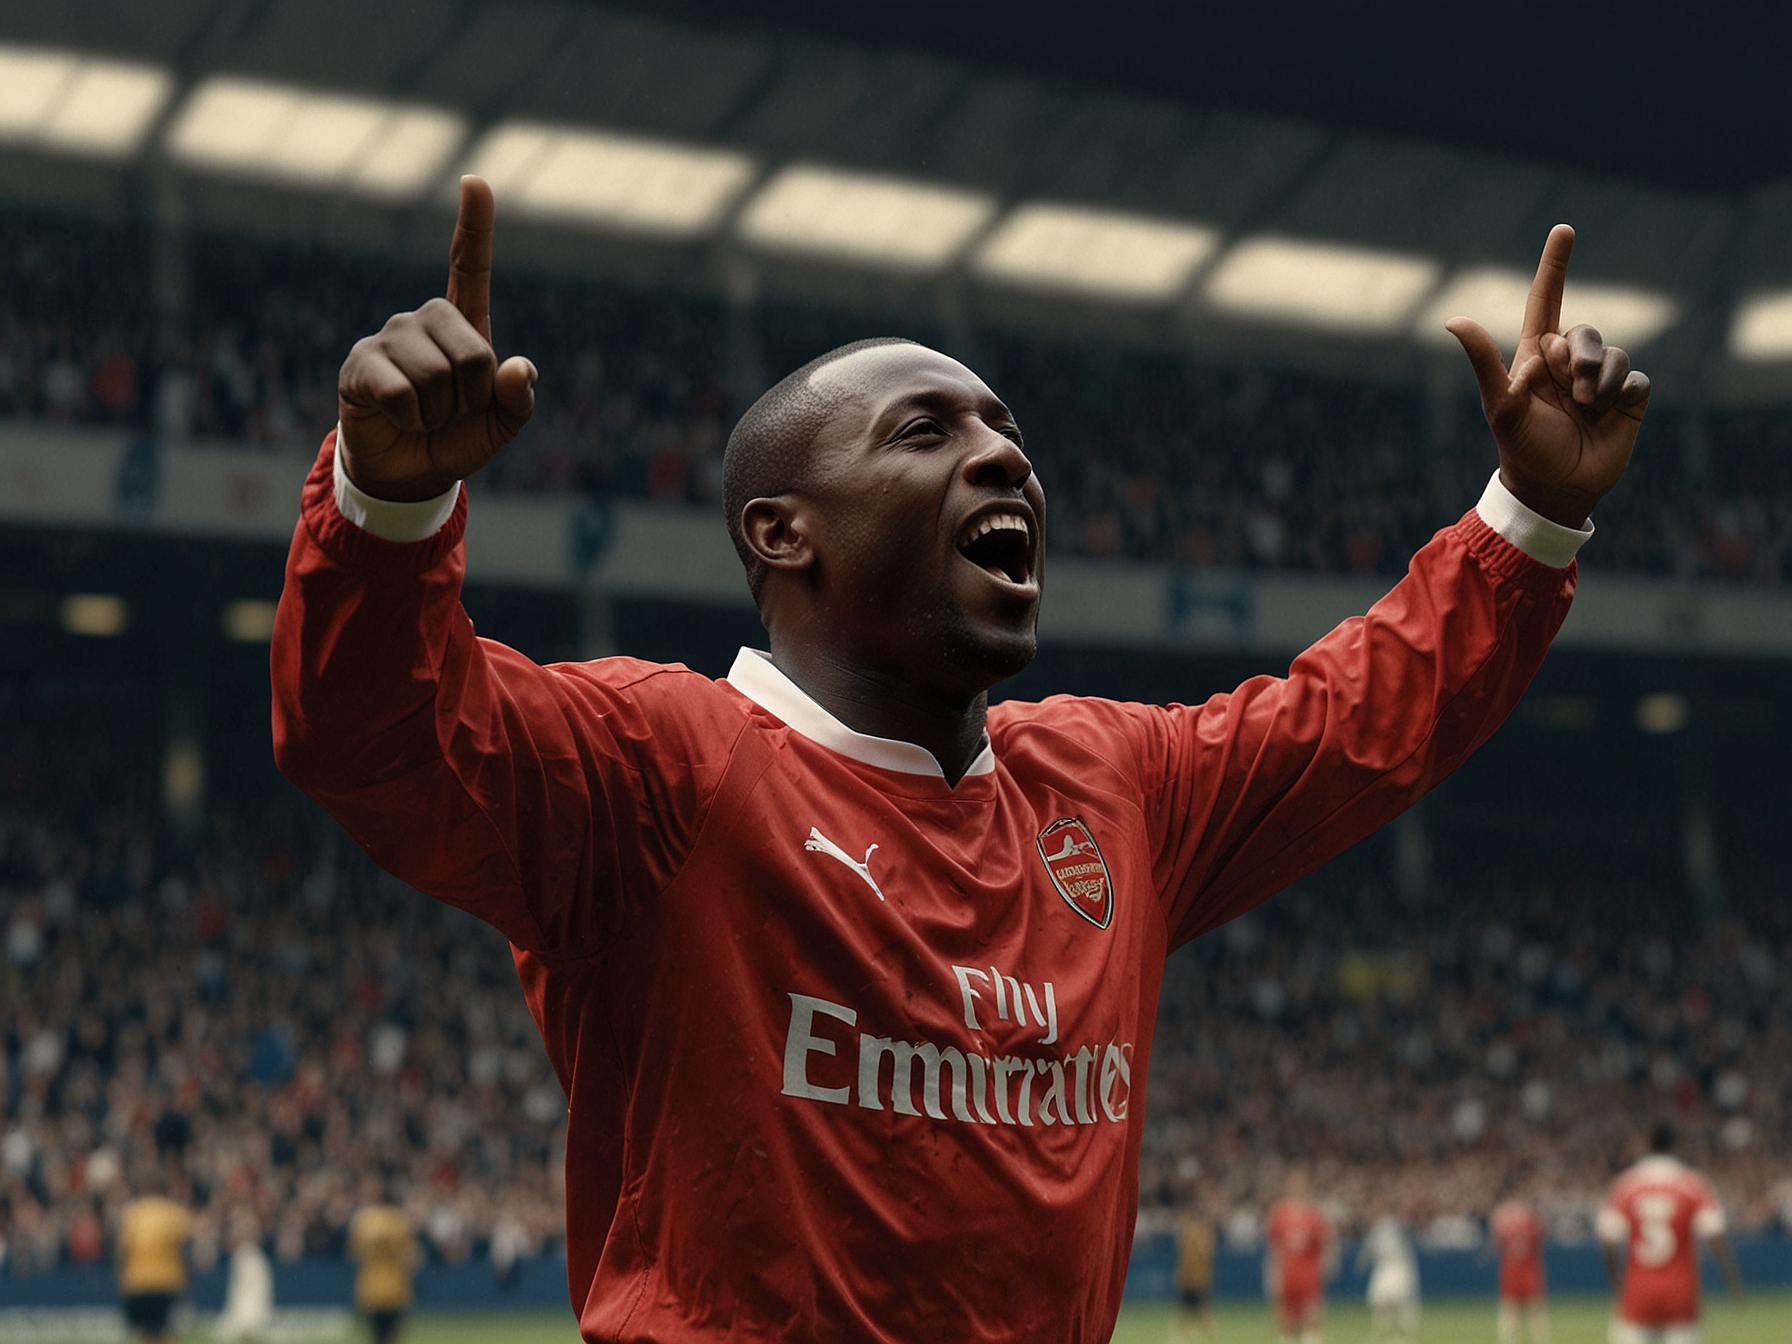 A nostalgic image of Kevin Campbell celebrating a goal in his Arsenal jersey during a Premier League match.